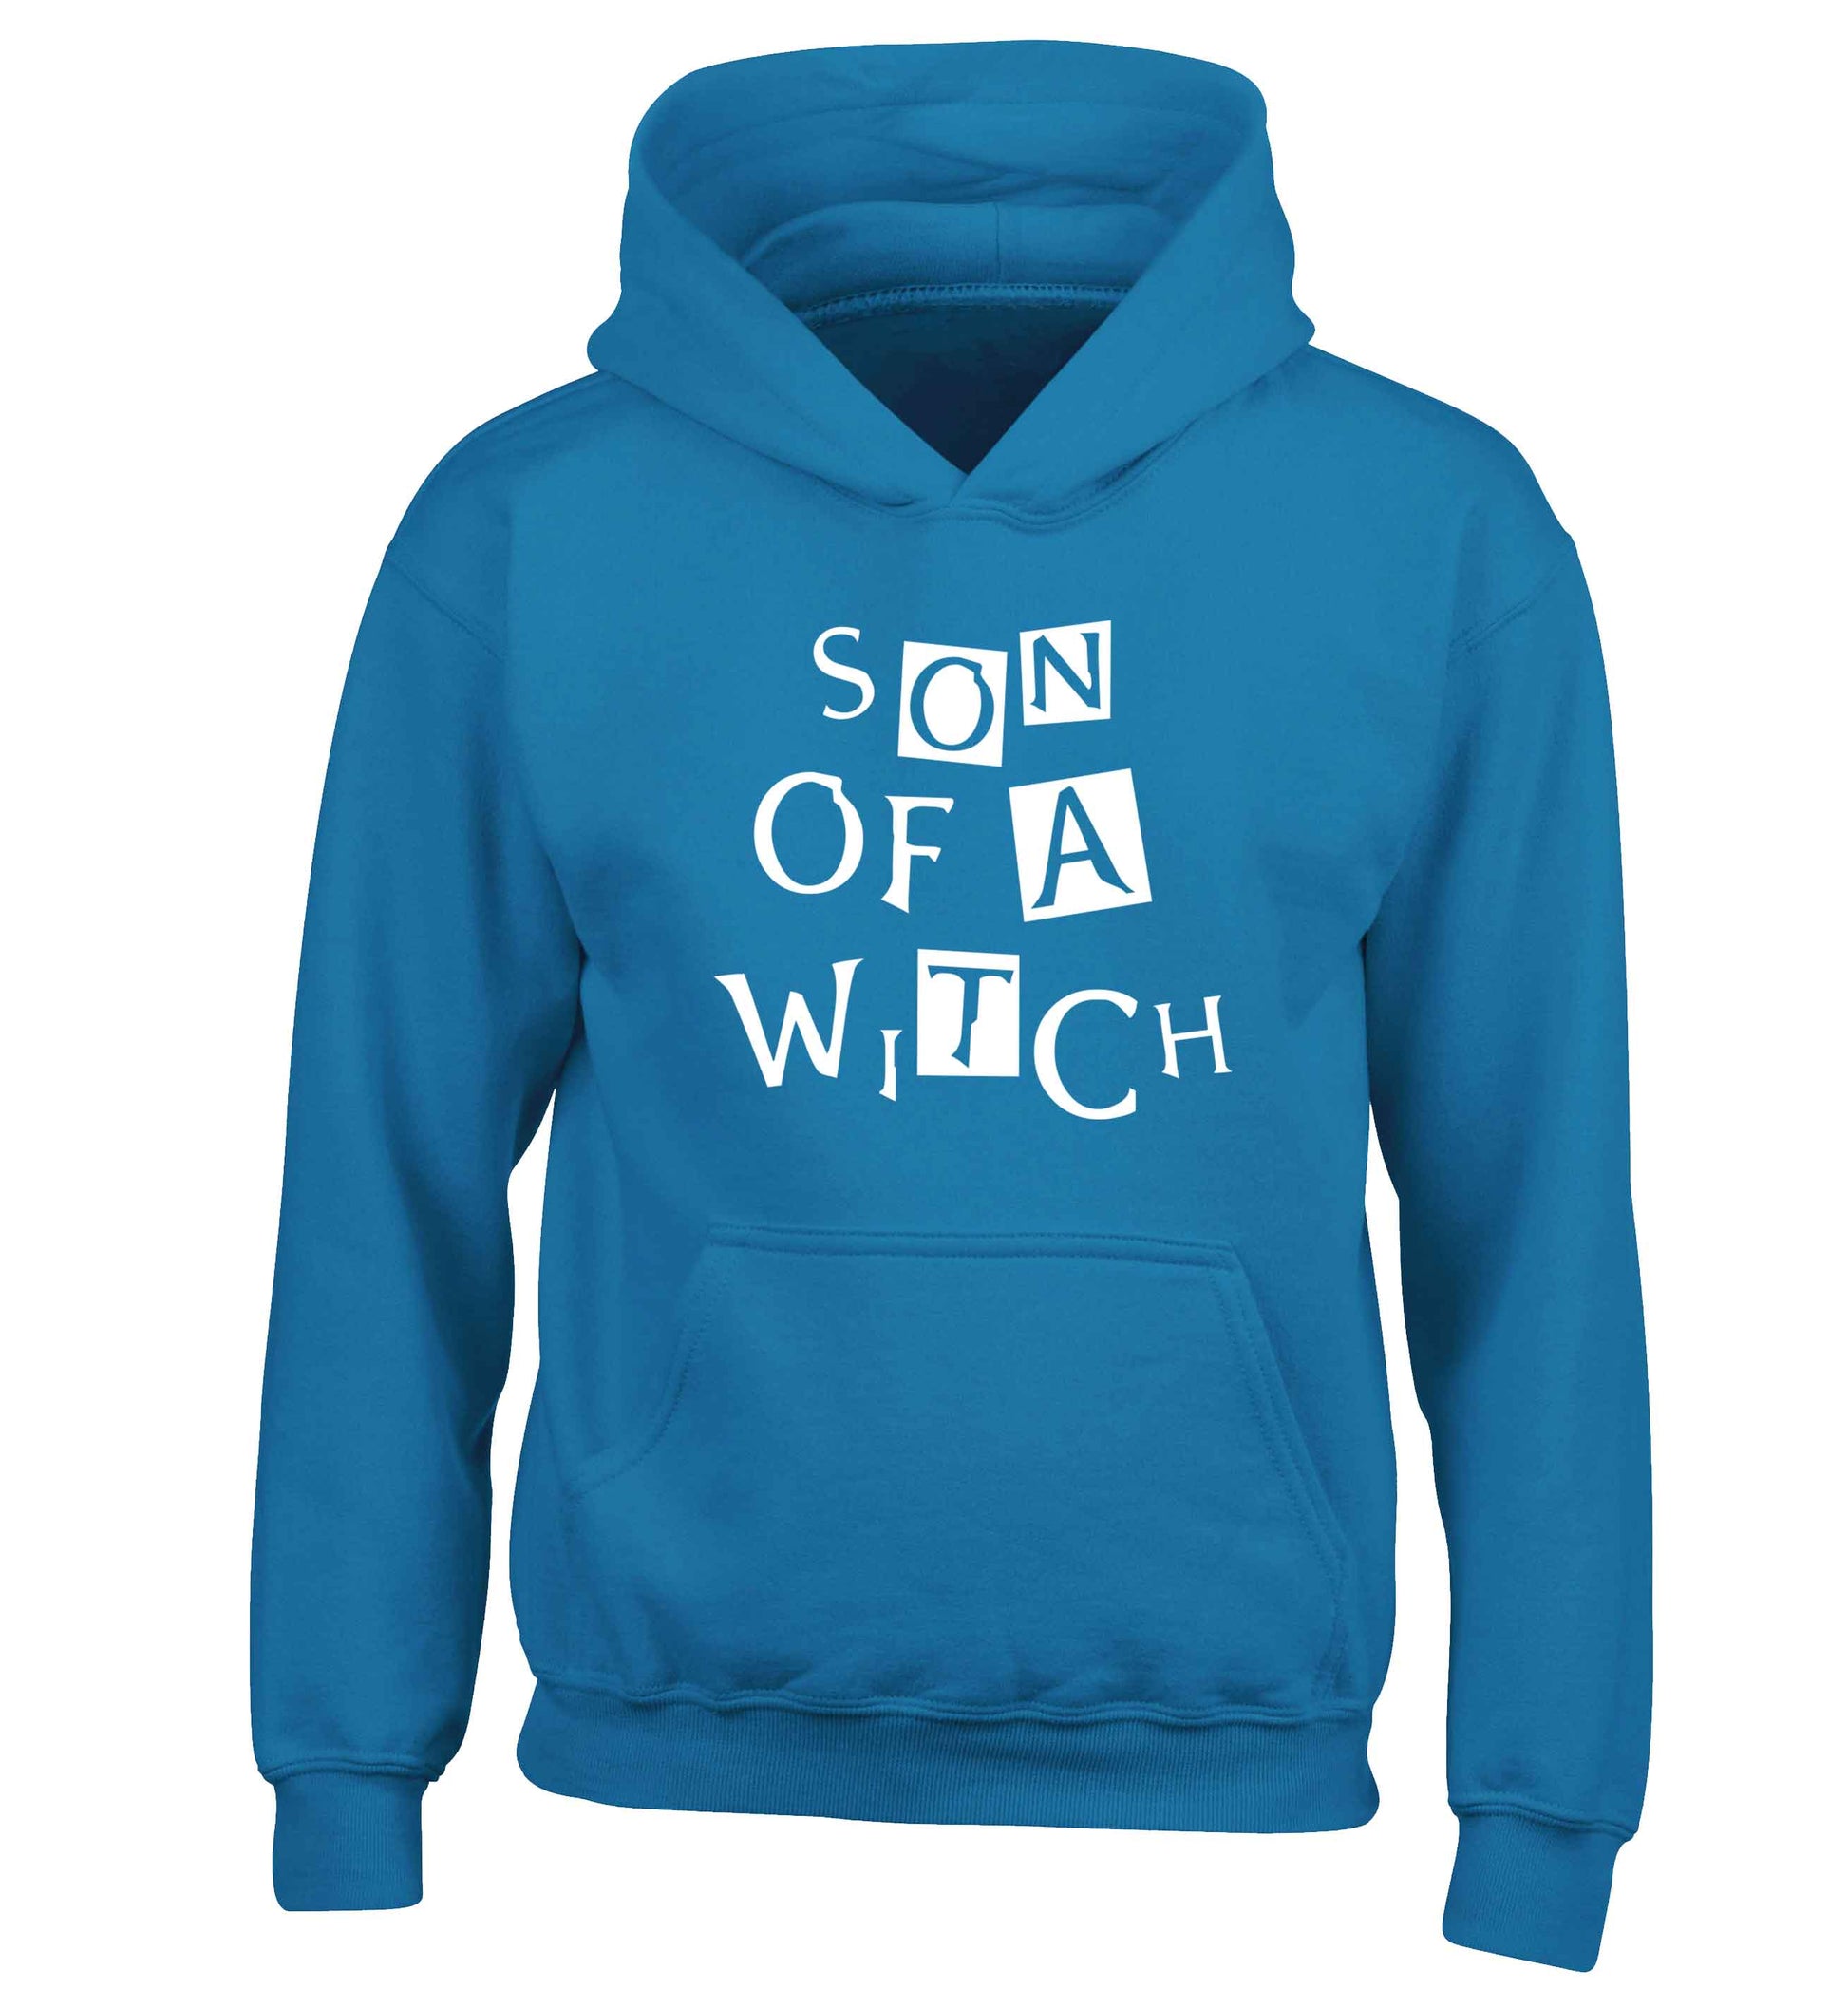 Son of a witch children's blue hoodie 12-13 Years